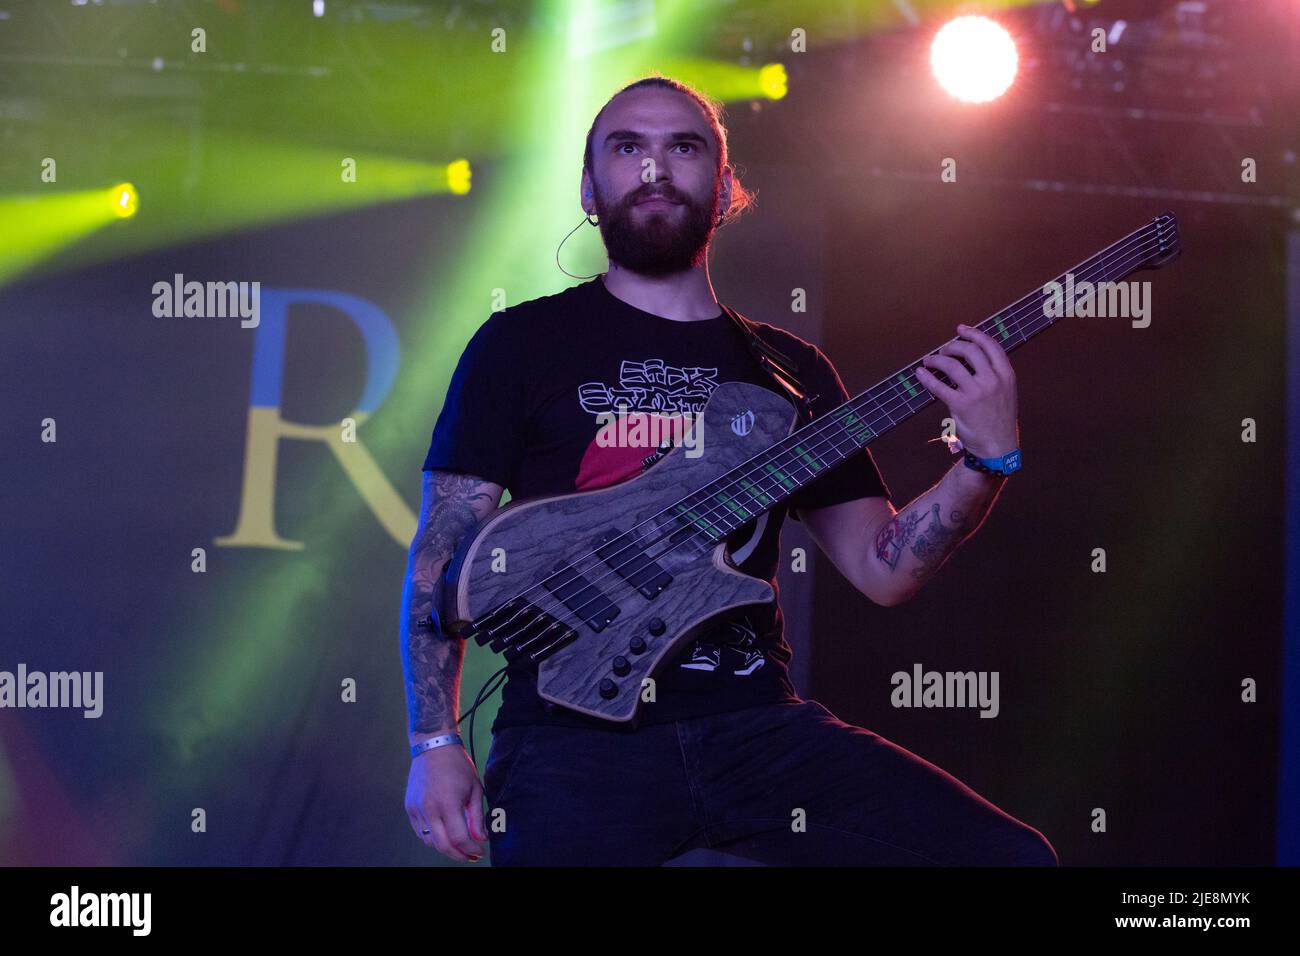 Oslo, Norway. 24th, June 2022. The Ukrainian heavy metal band Jinjer performs a live concert during the Norwegian music festival Tons of Rock 2022 in Oslo. Here bass player Eugene Abdukhanov is seen live on stage. (Photo credit: Gonzales Photo - Per-Otto Oppi). Stock Photo